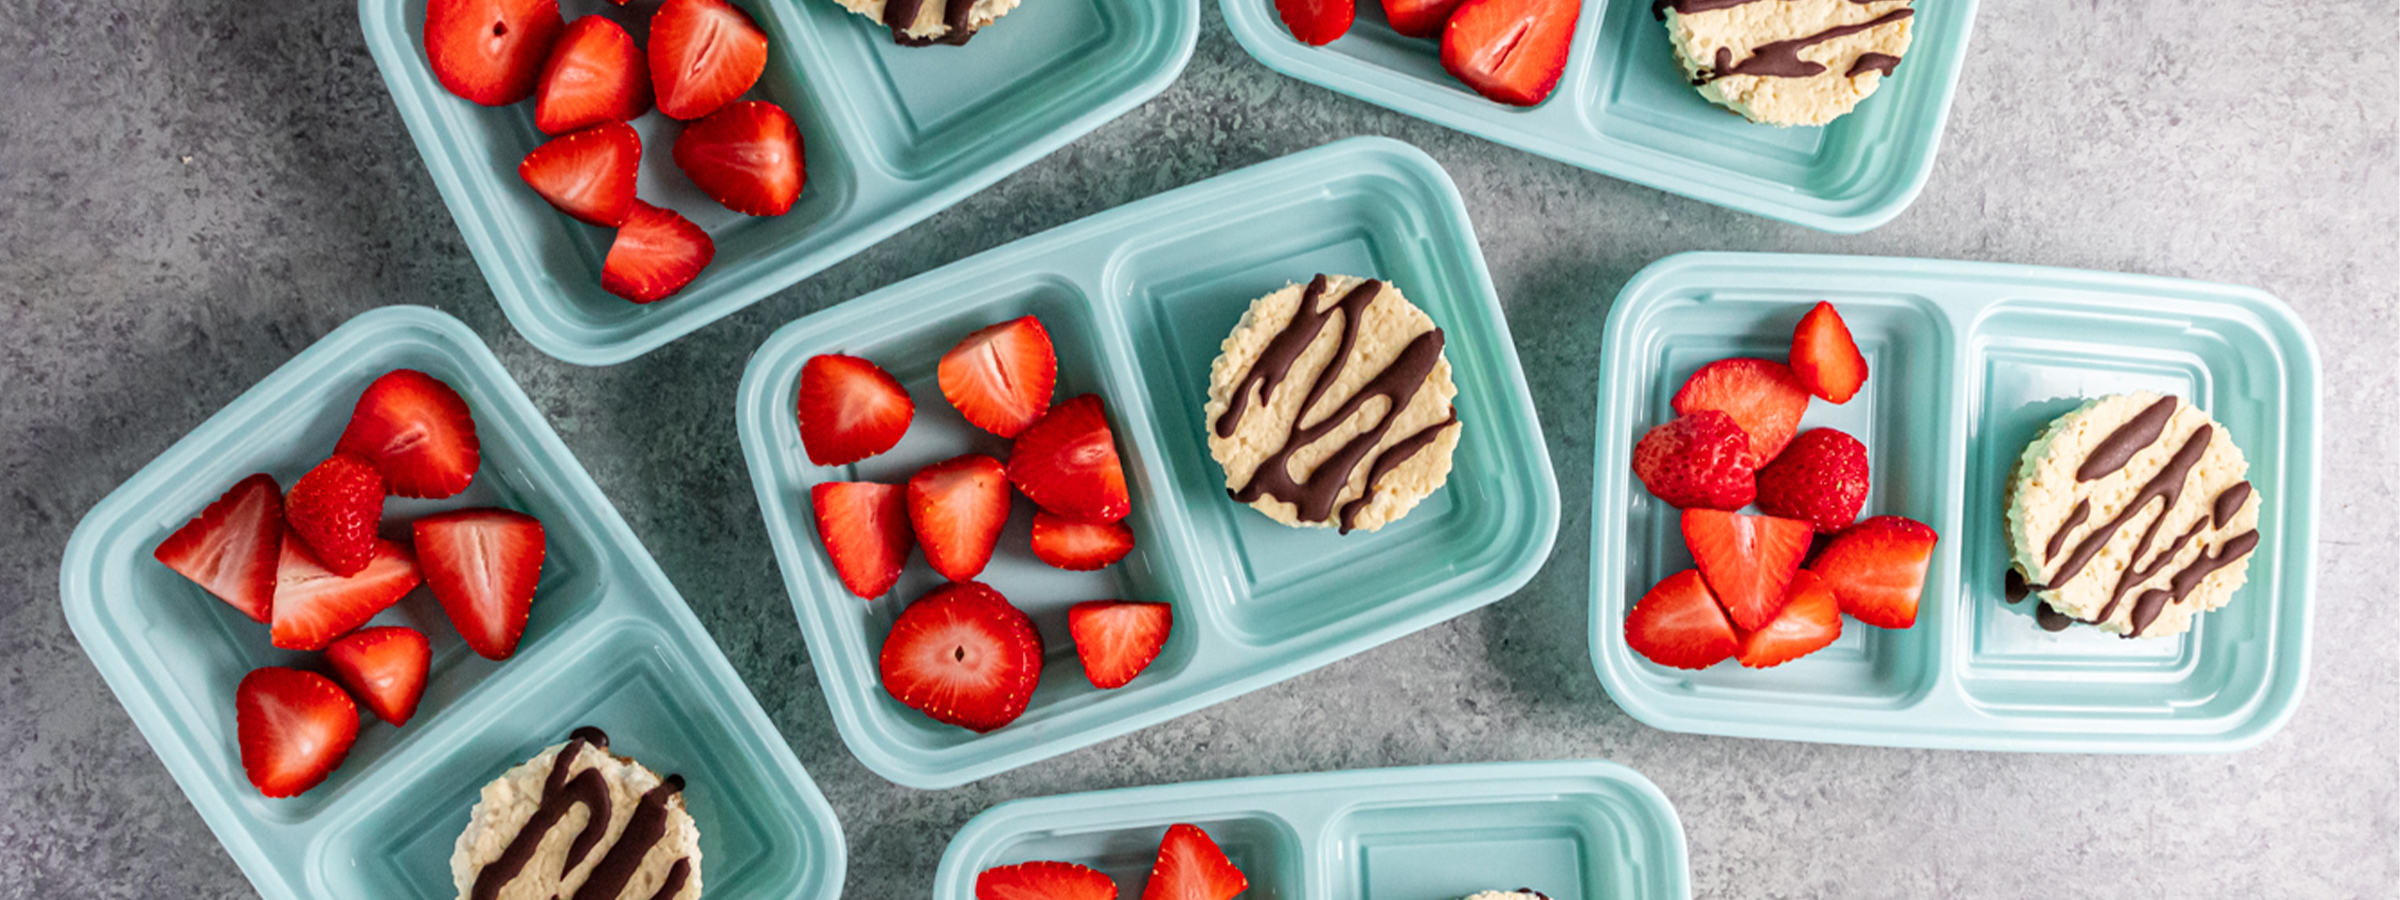 over head image of peanut butter cheesecake cups in blue containers along side strawberries